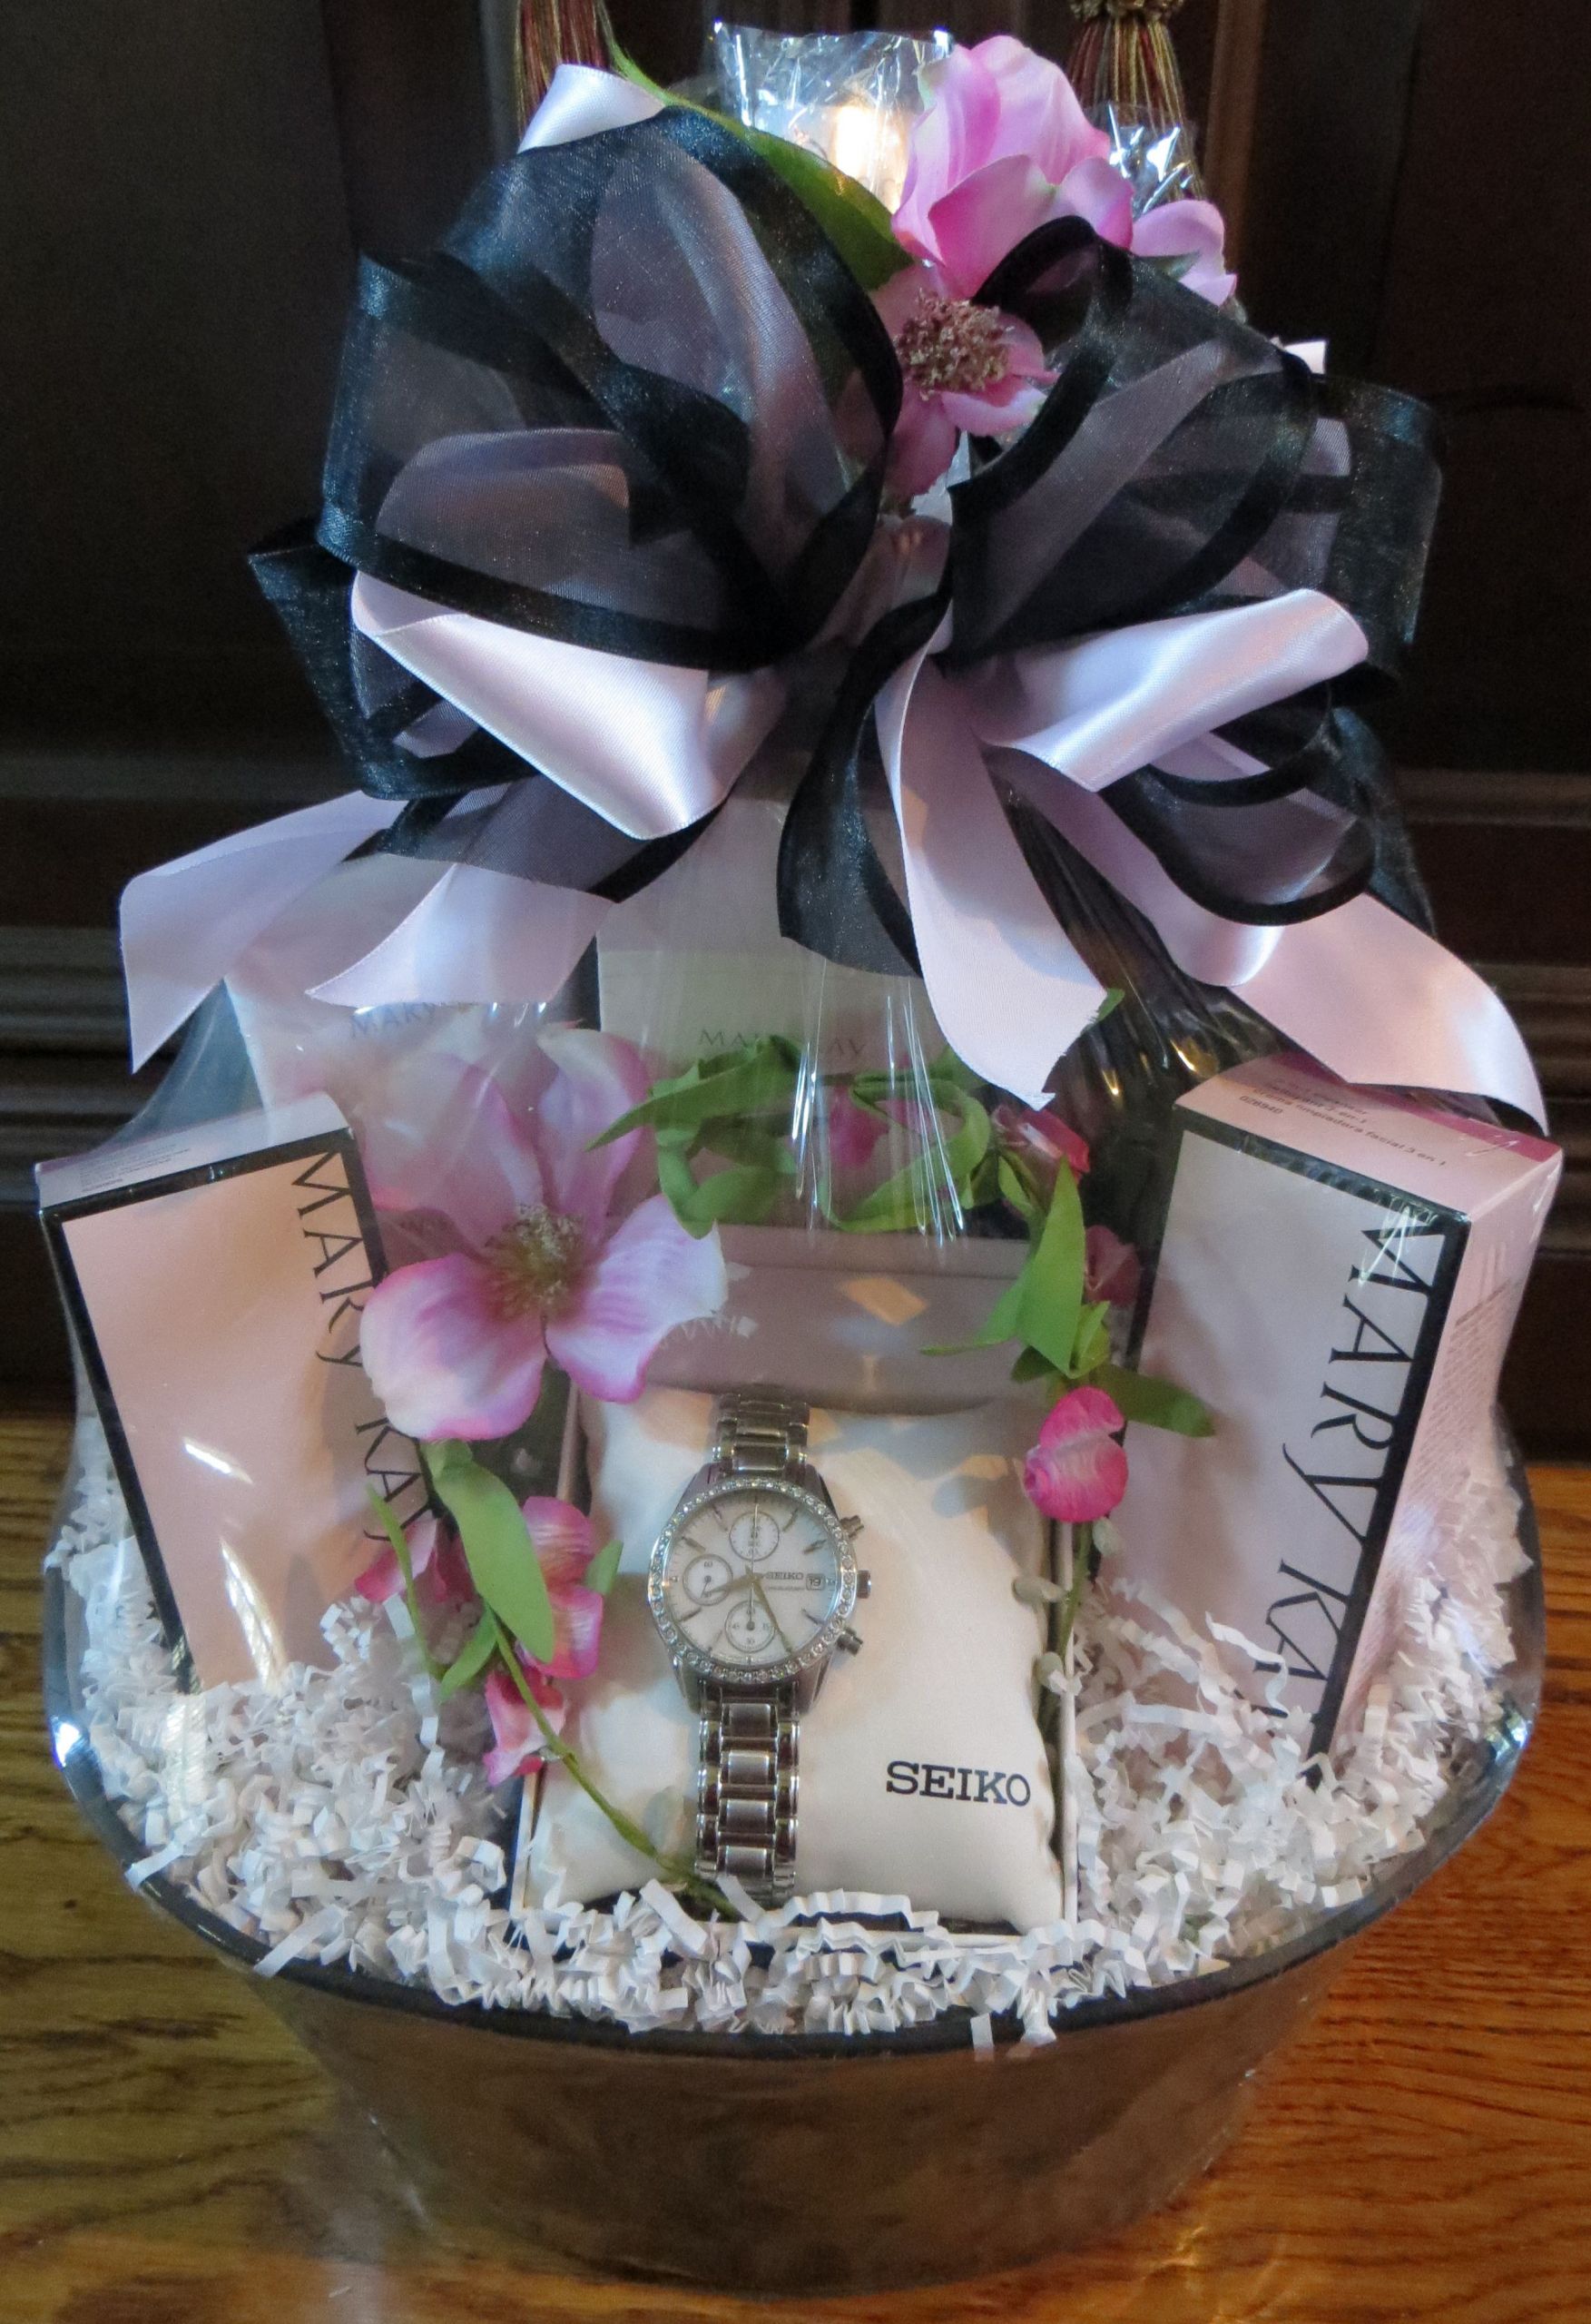 Mary Kay Gift Baskets Ideas
 The Timewise Gift Basket features Mary Kay products and